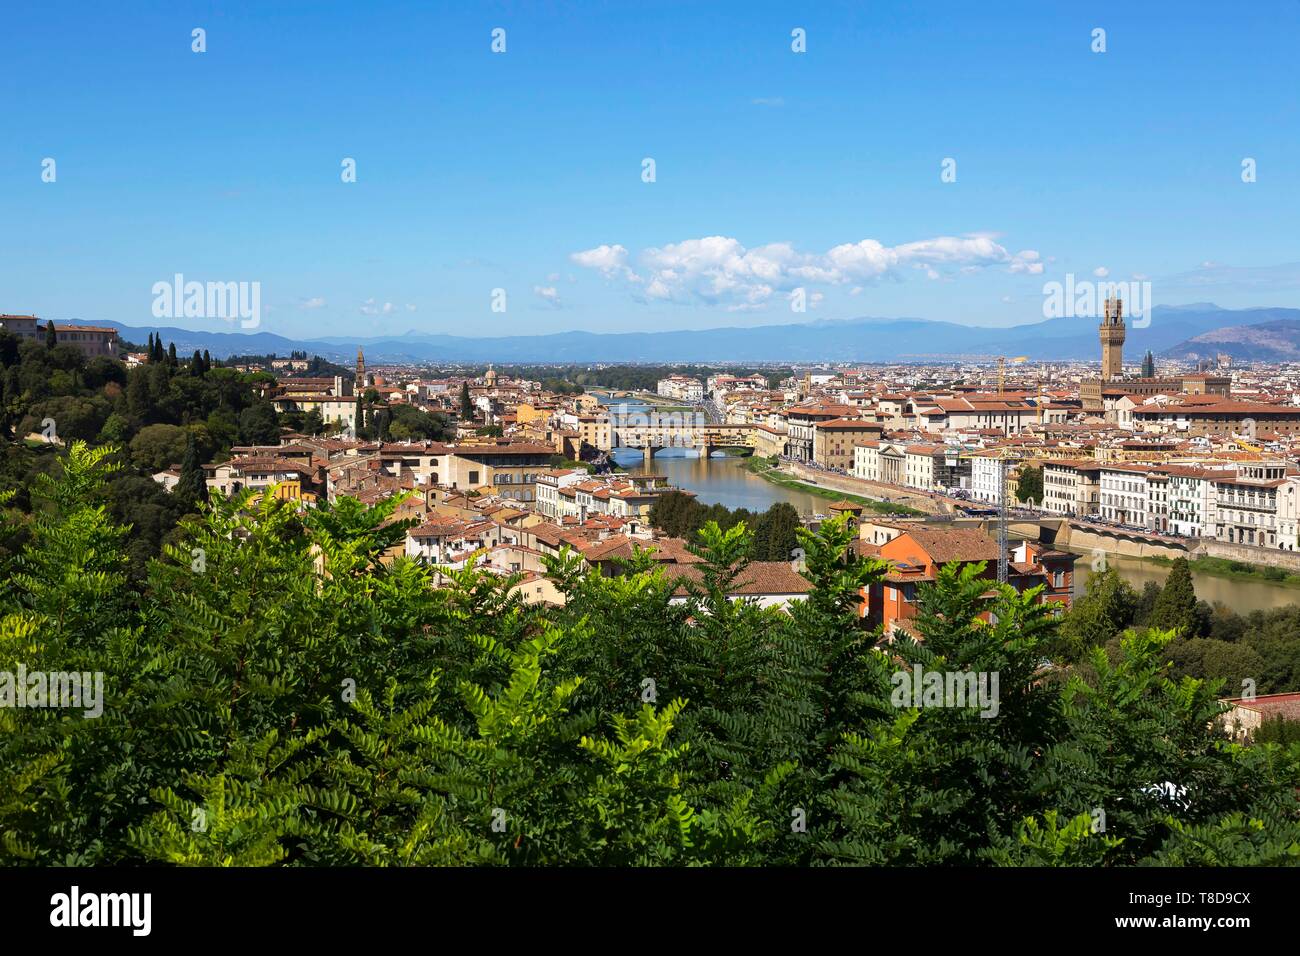 Italy, Tuscany, Florence, historic centre listed as World Heritage by UNESCO, Piazzale Michelangelo, general view of Florence Stock Photo